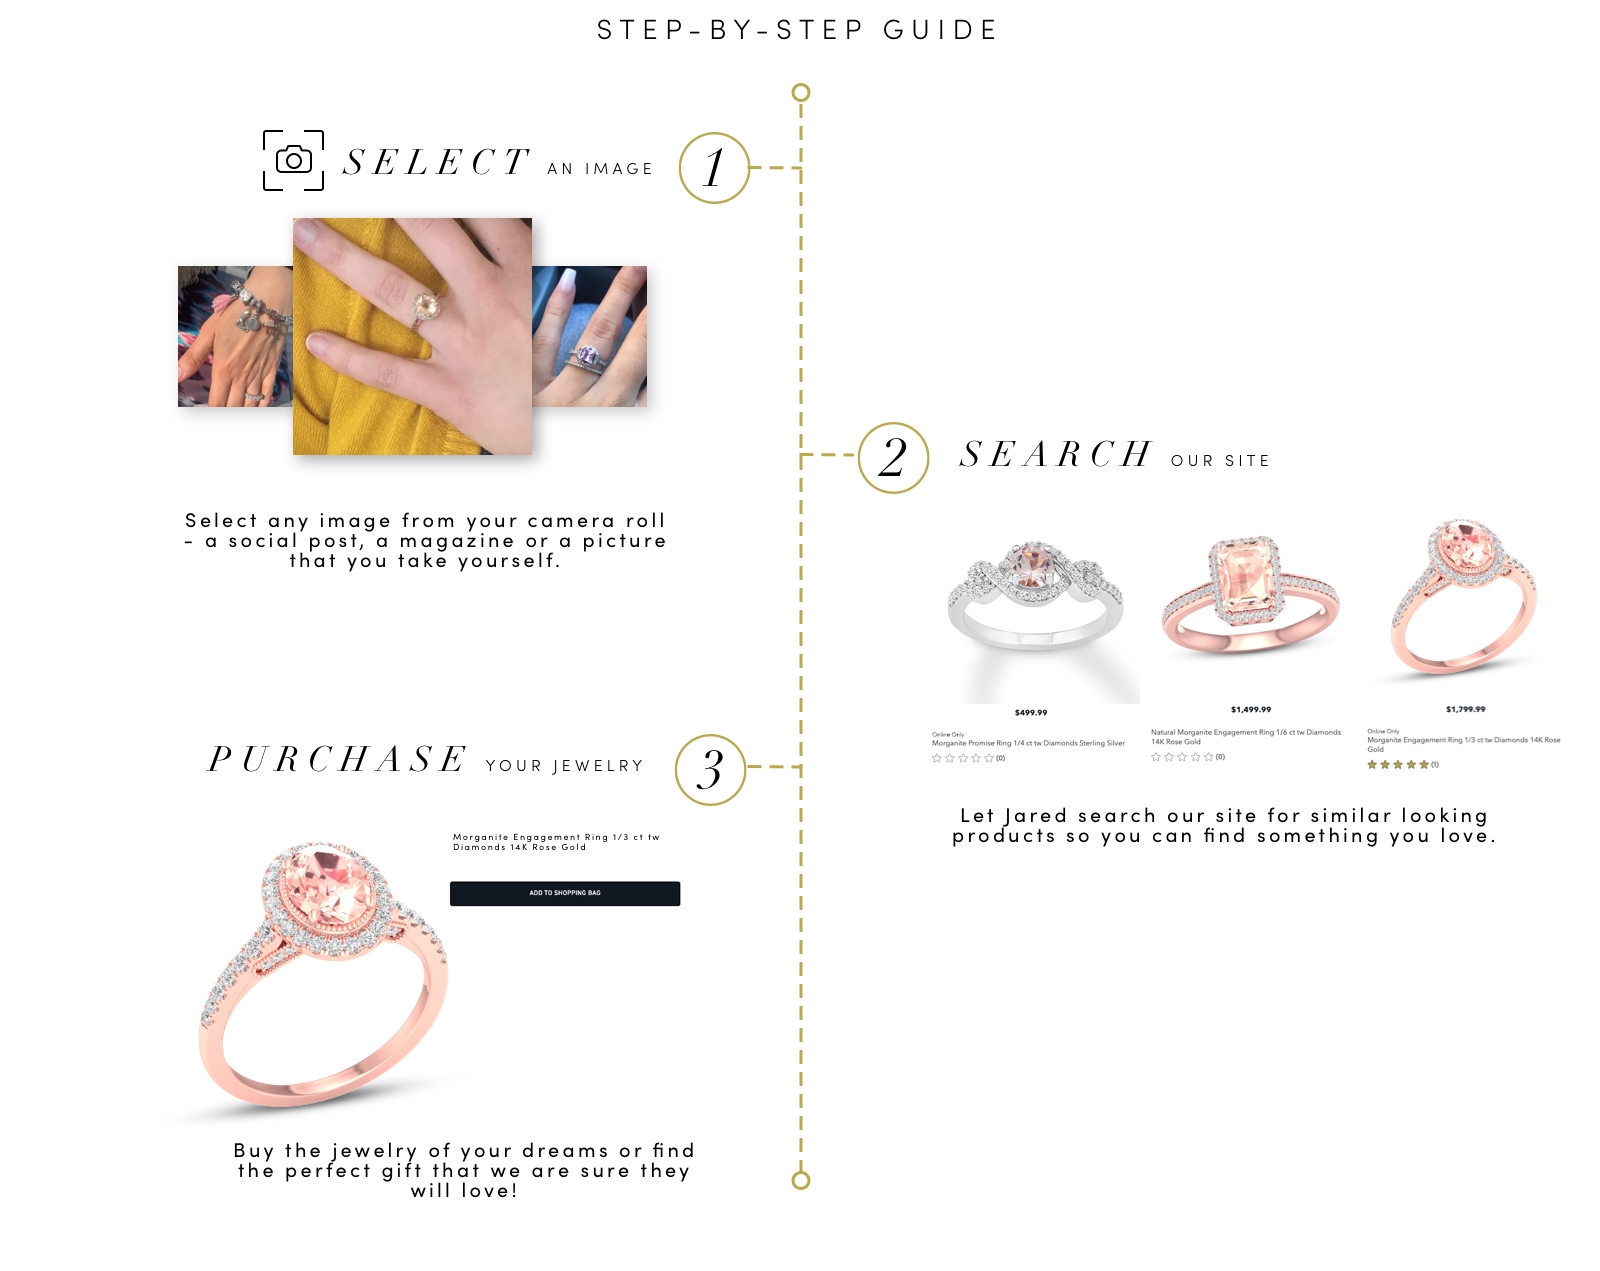 Step by step guide showing how to upload images, search the site and purchase using the visual search tool.